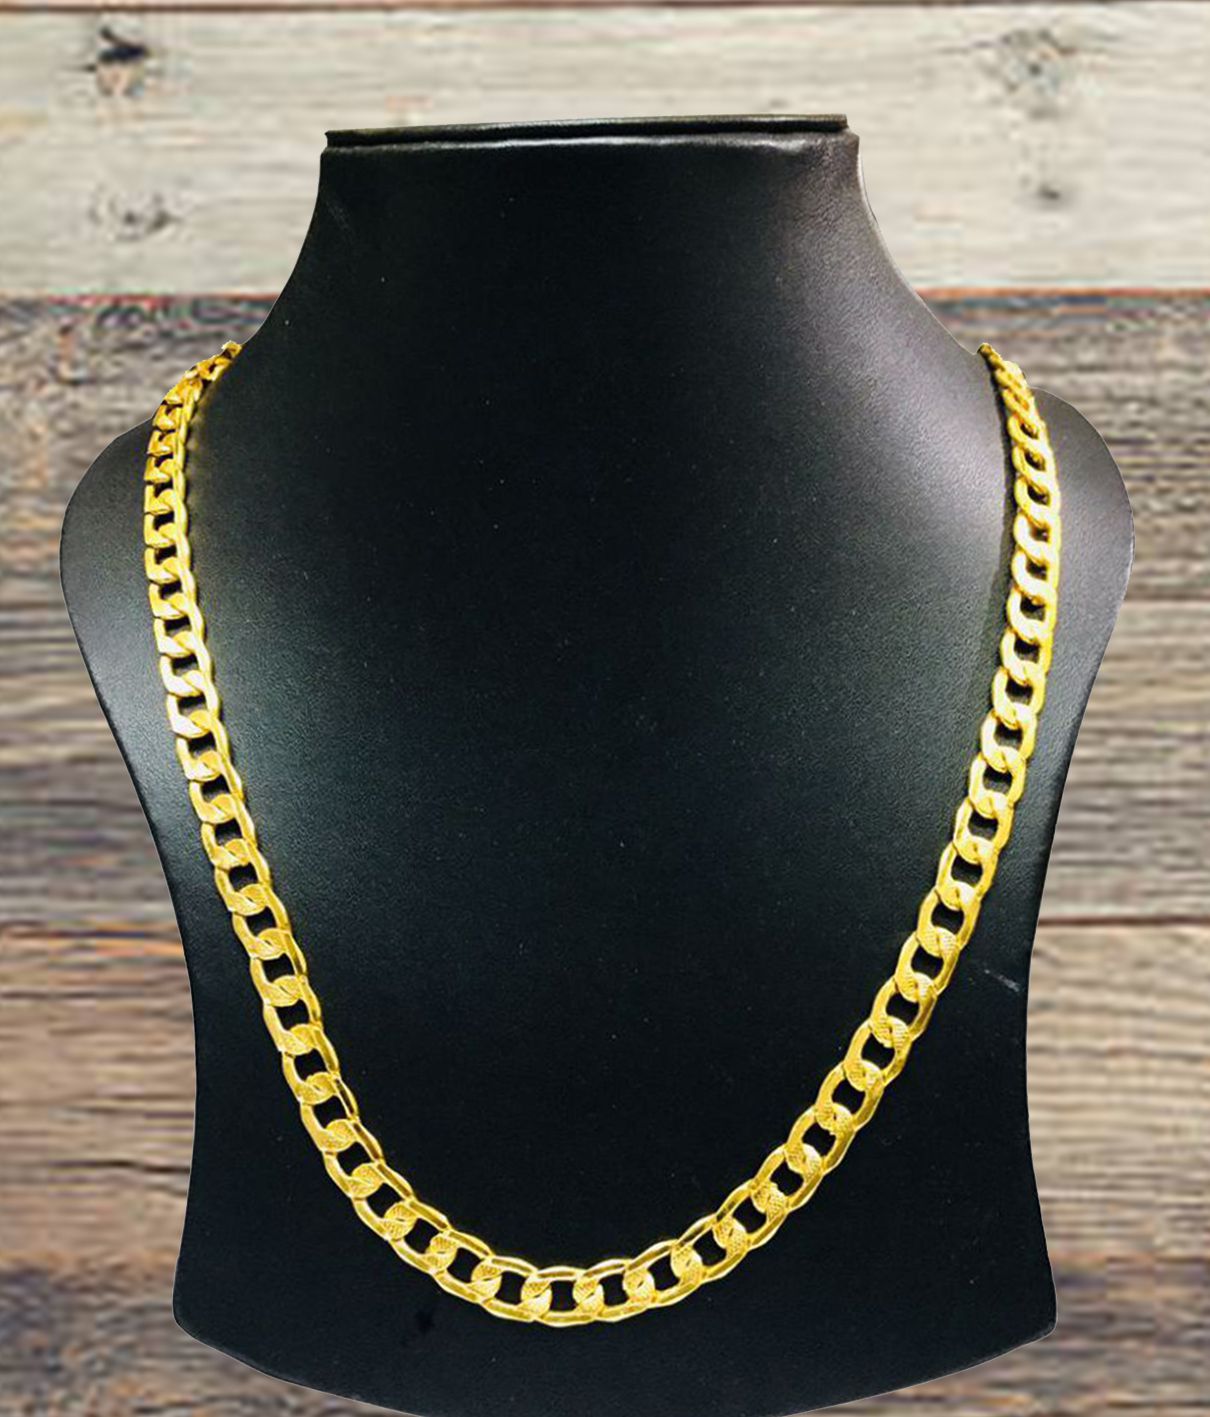 22K Gold Plated Neck Chain for men 20 Inch long , 8mm ...